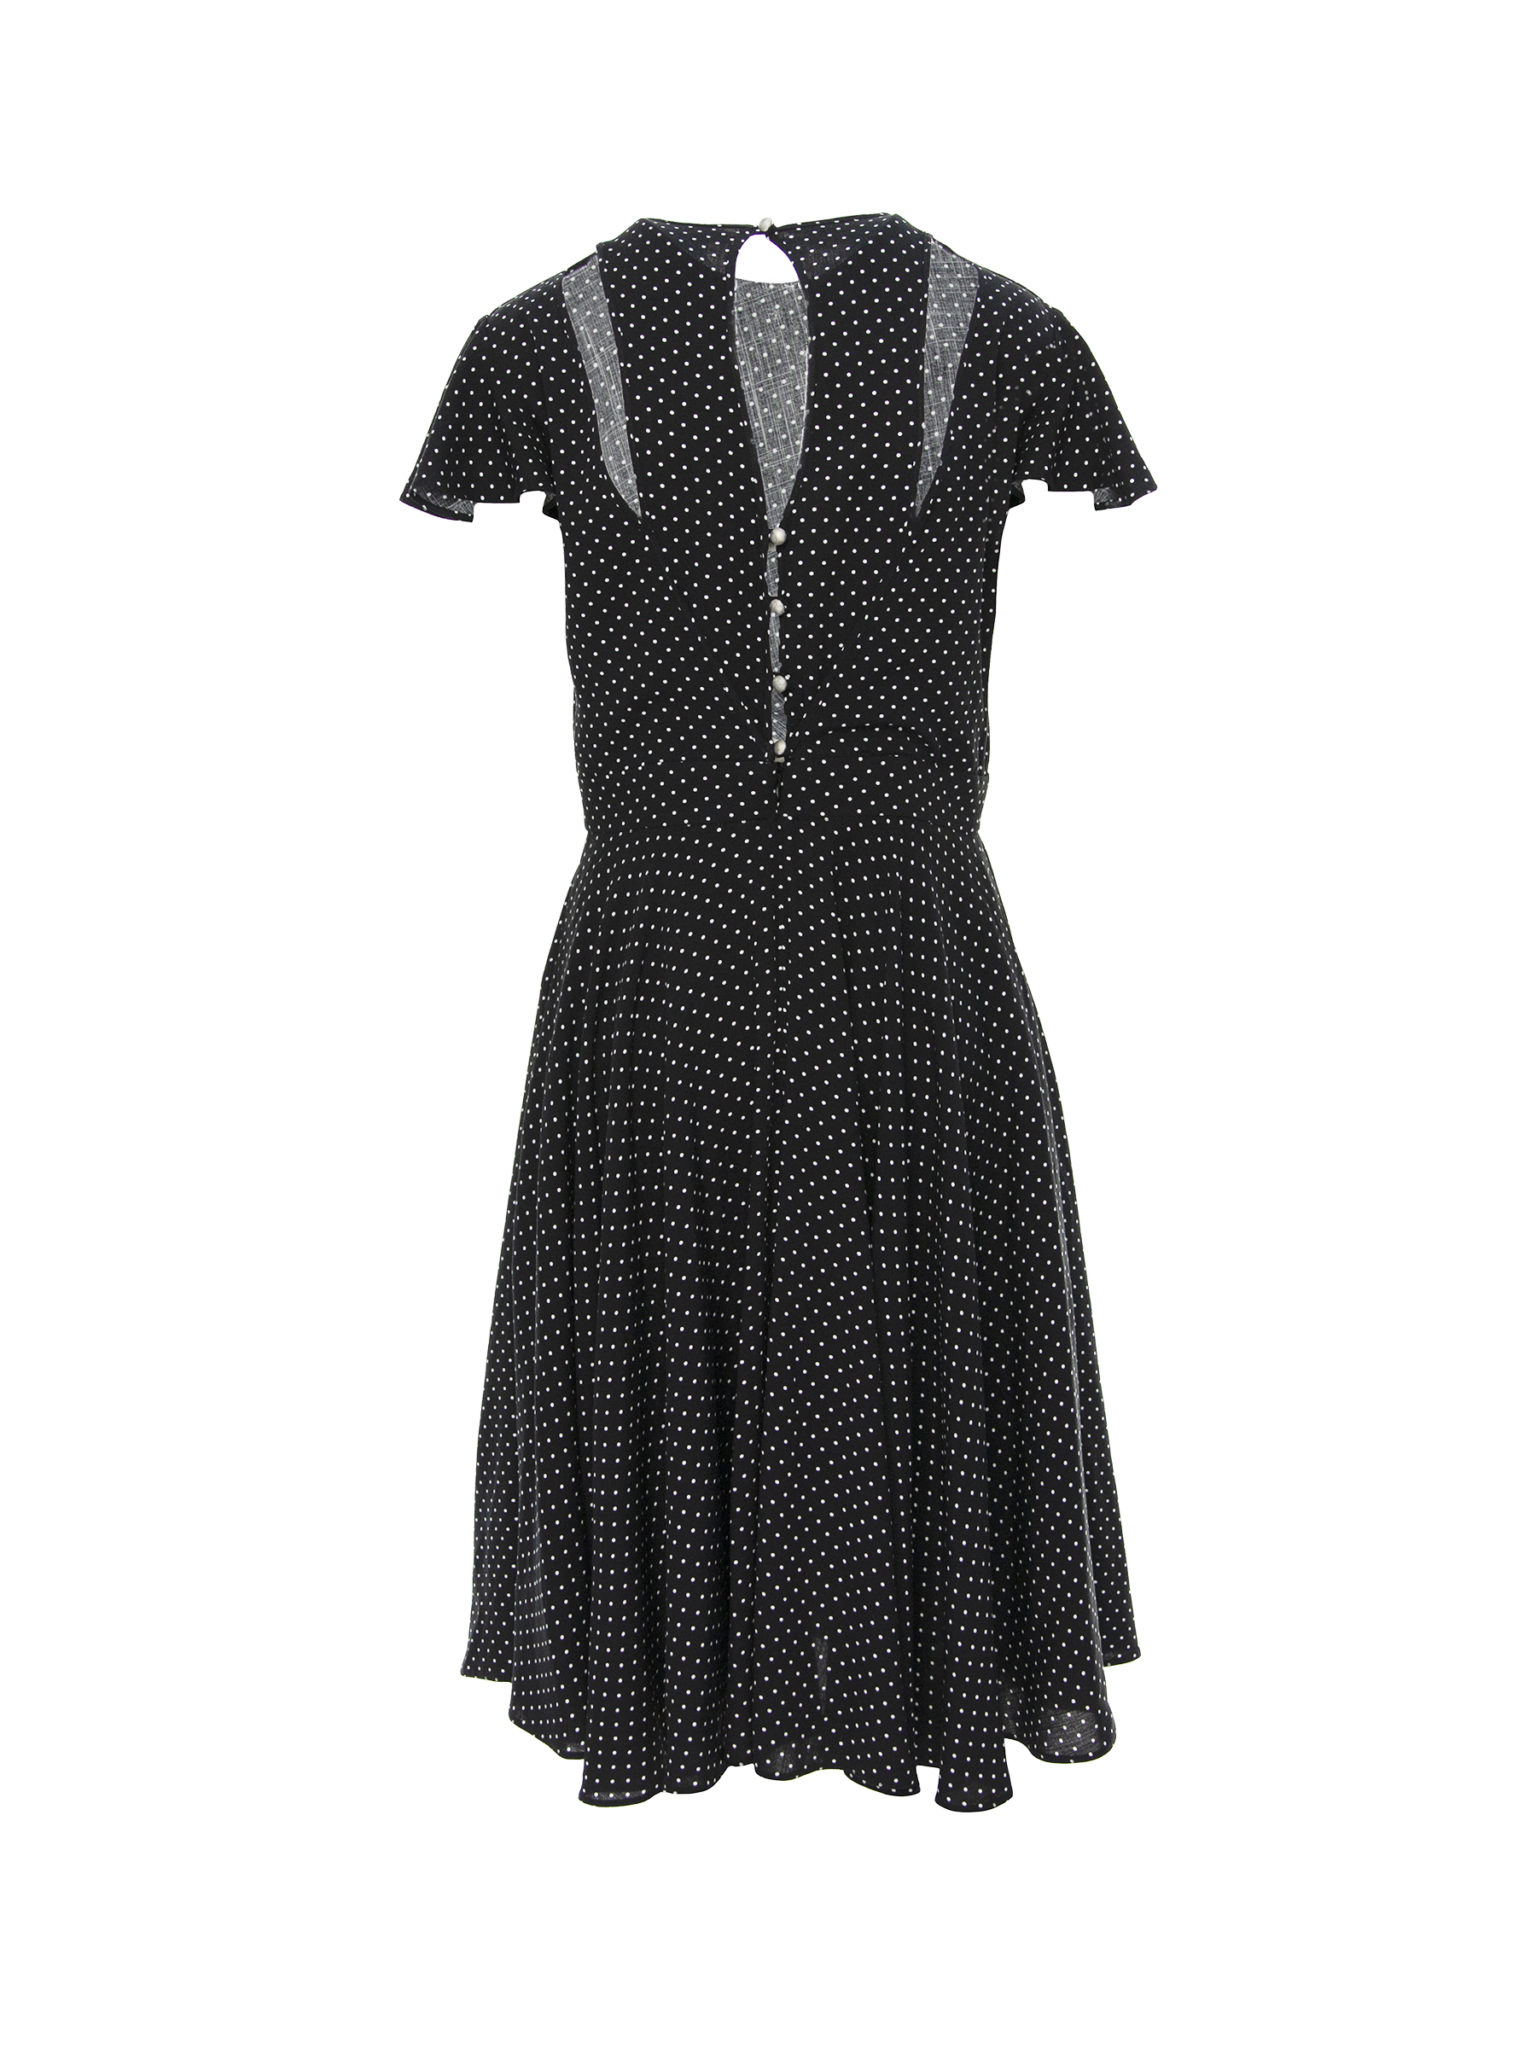 Midi dress with open back and dots pattern